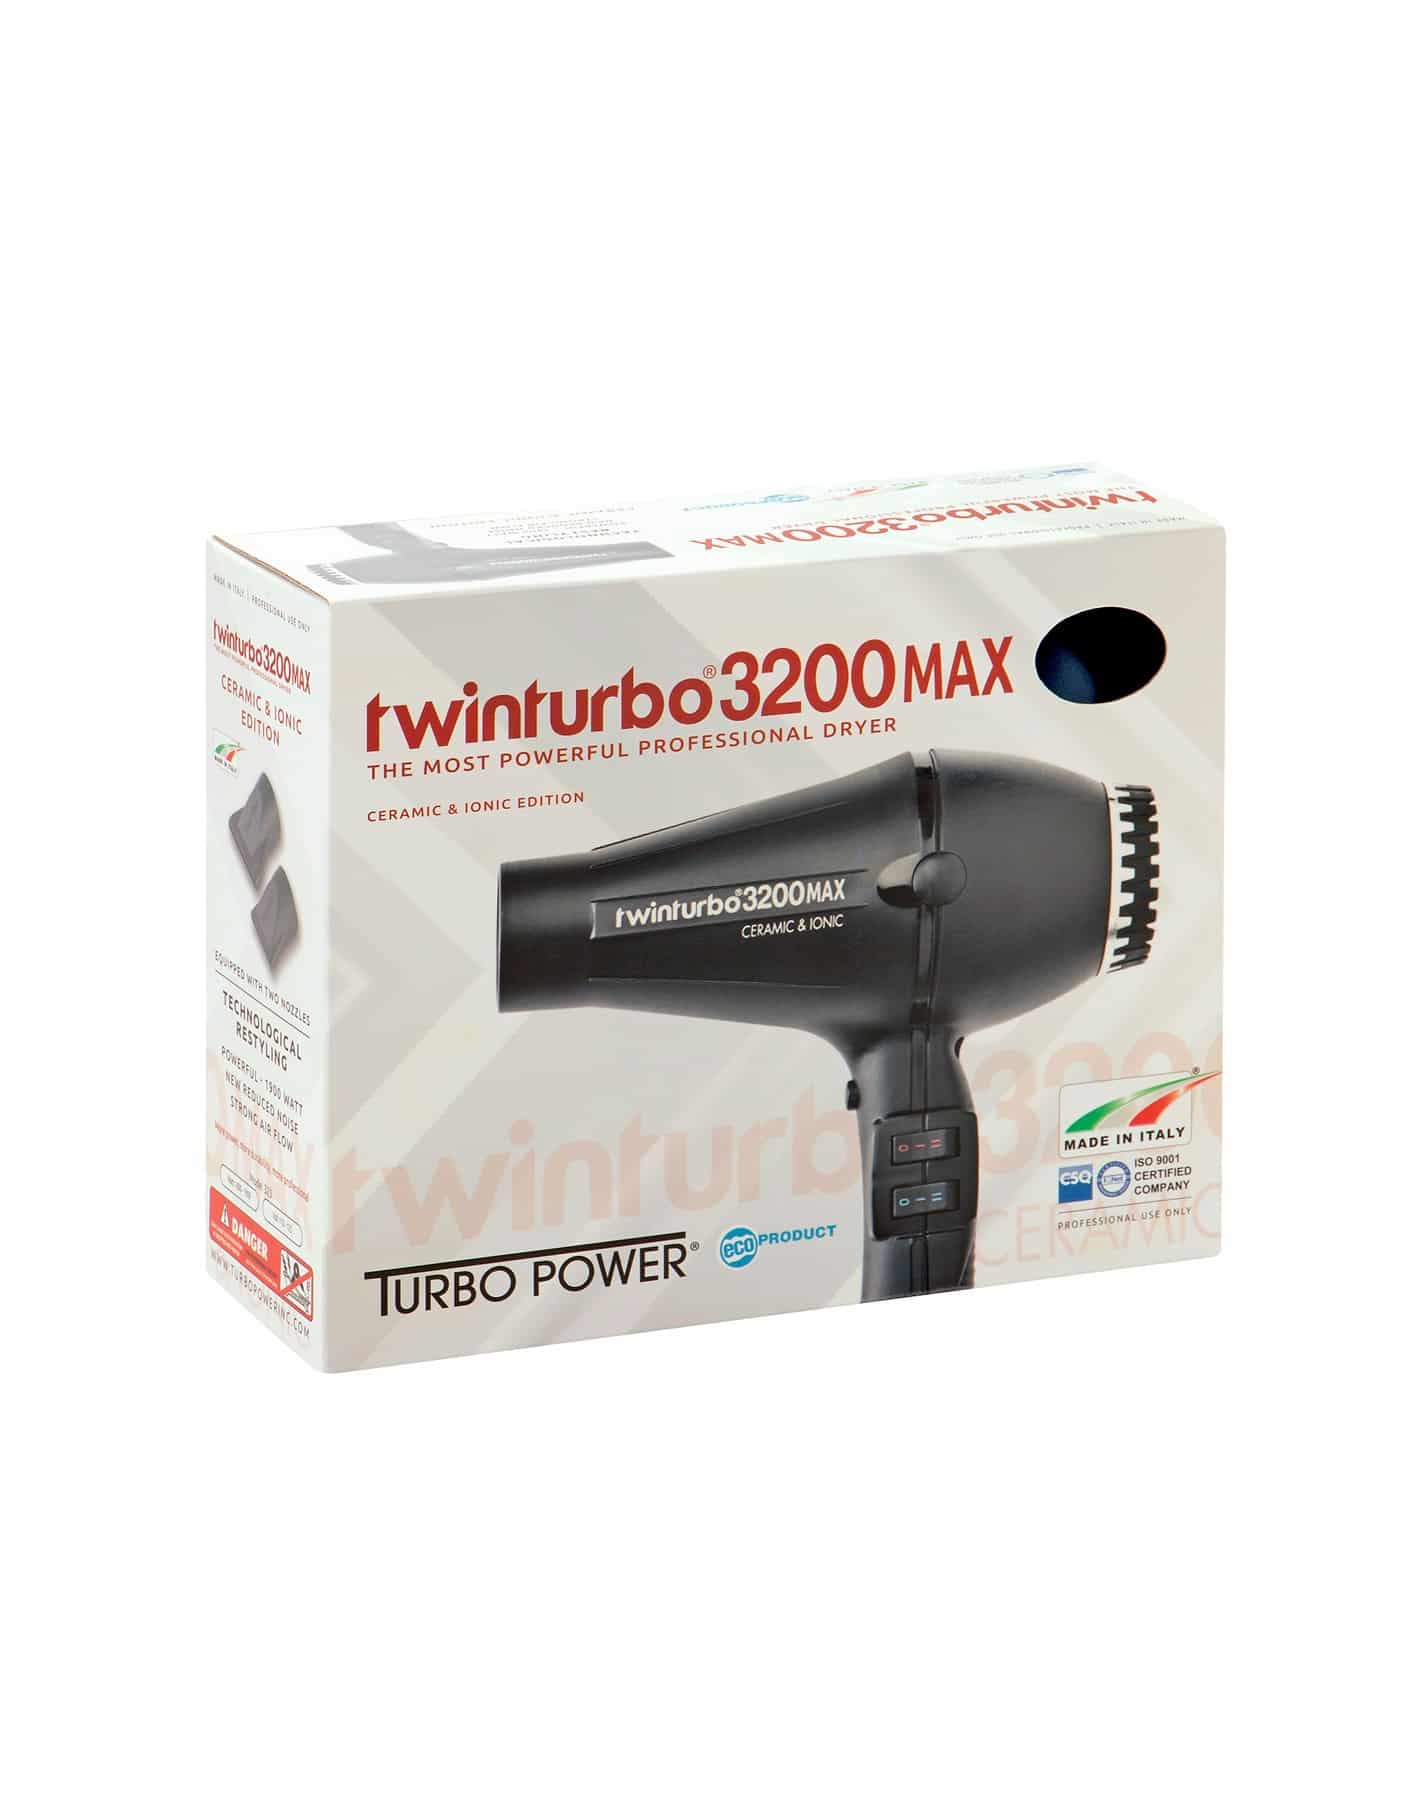 https://www.barberdepots.com/wp-content/uploads/2013/10/turbo-power-twinturbo-3200-max-ceramic-ionic-hair-dryer-package.jpg